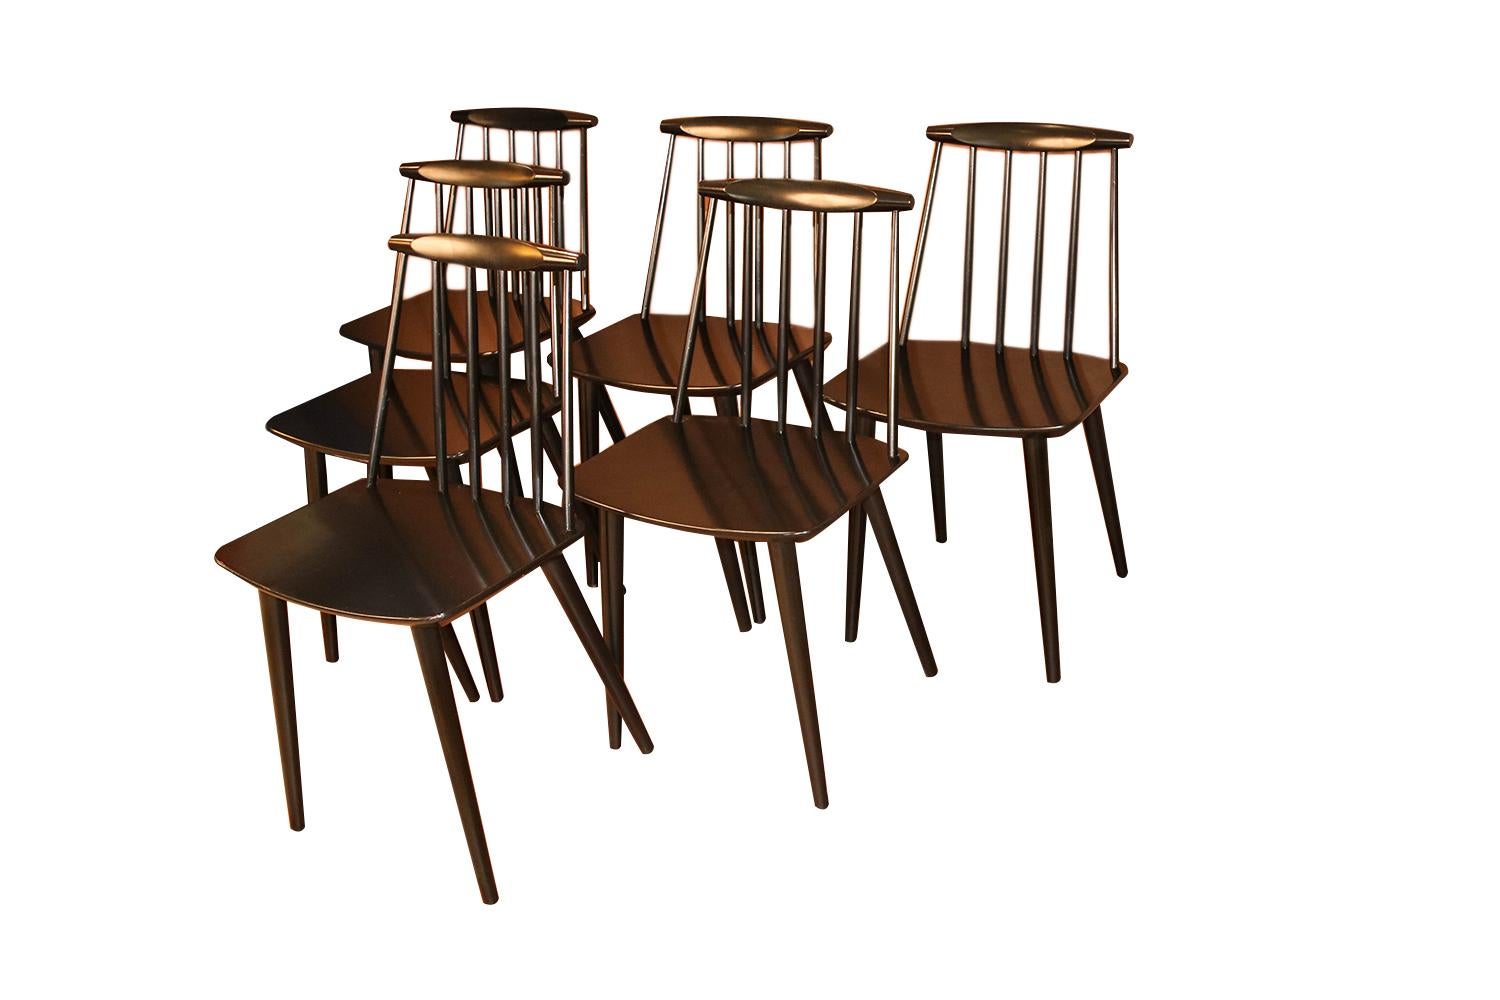 Exceptional set of six original, Spindle Back, model J77 Chairs by Folke Palsson for FDB Mobler, Denmark, circa 1970s. They are of solid wood construction featuring a concave serpentine crest rail above six turned spindles. The scooped seat is